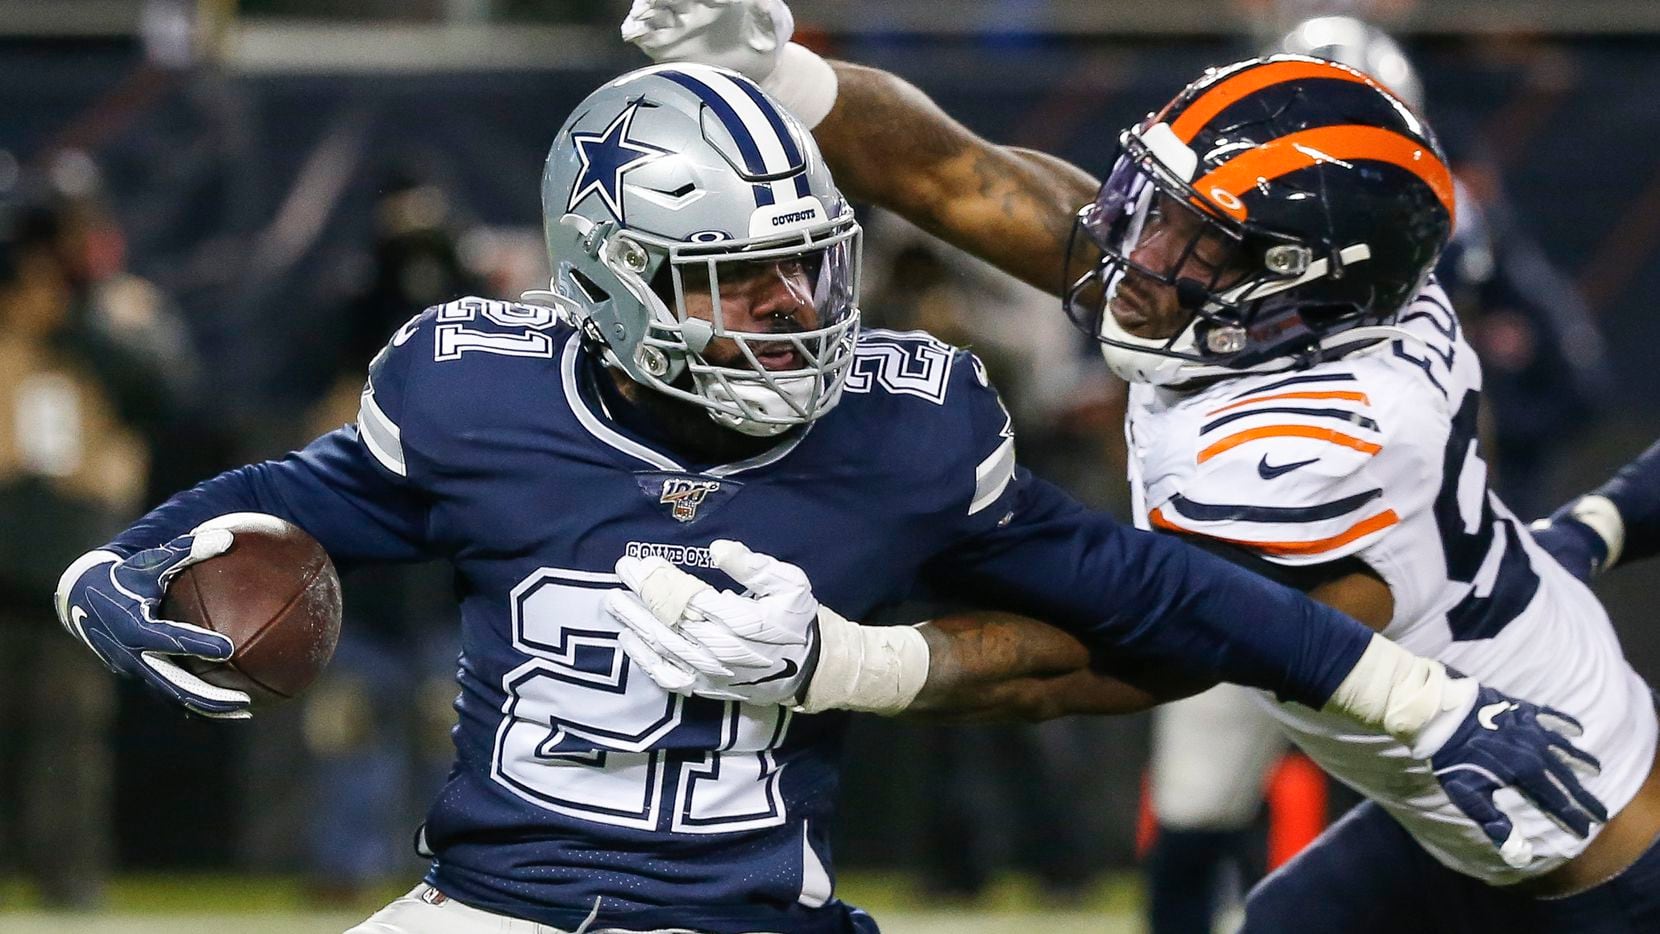 Chicago Bears outside linebacker Leonard Floyd (94) works to bring down Dallas Cowboys running back Ezekiel Elliott (21) during the second half a NFL matchup between the Dallas Cowboys and the Chicago Bears on Thursday, Dec. 5, 2019, at Soldier Field in Chicago.